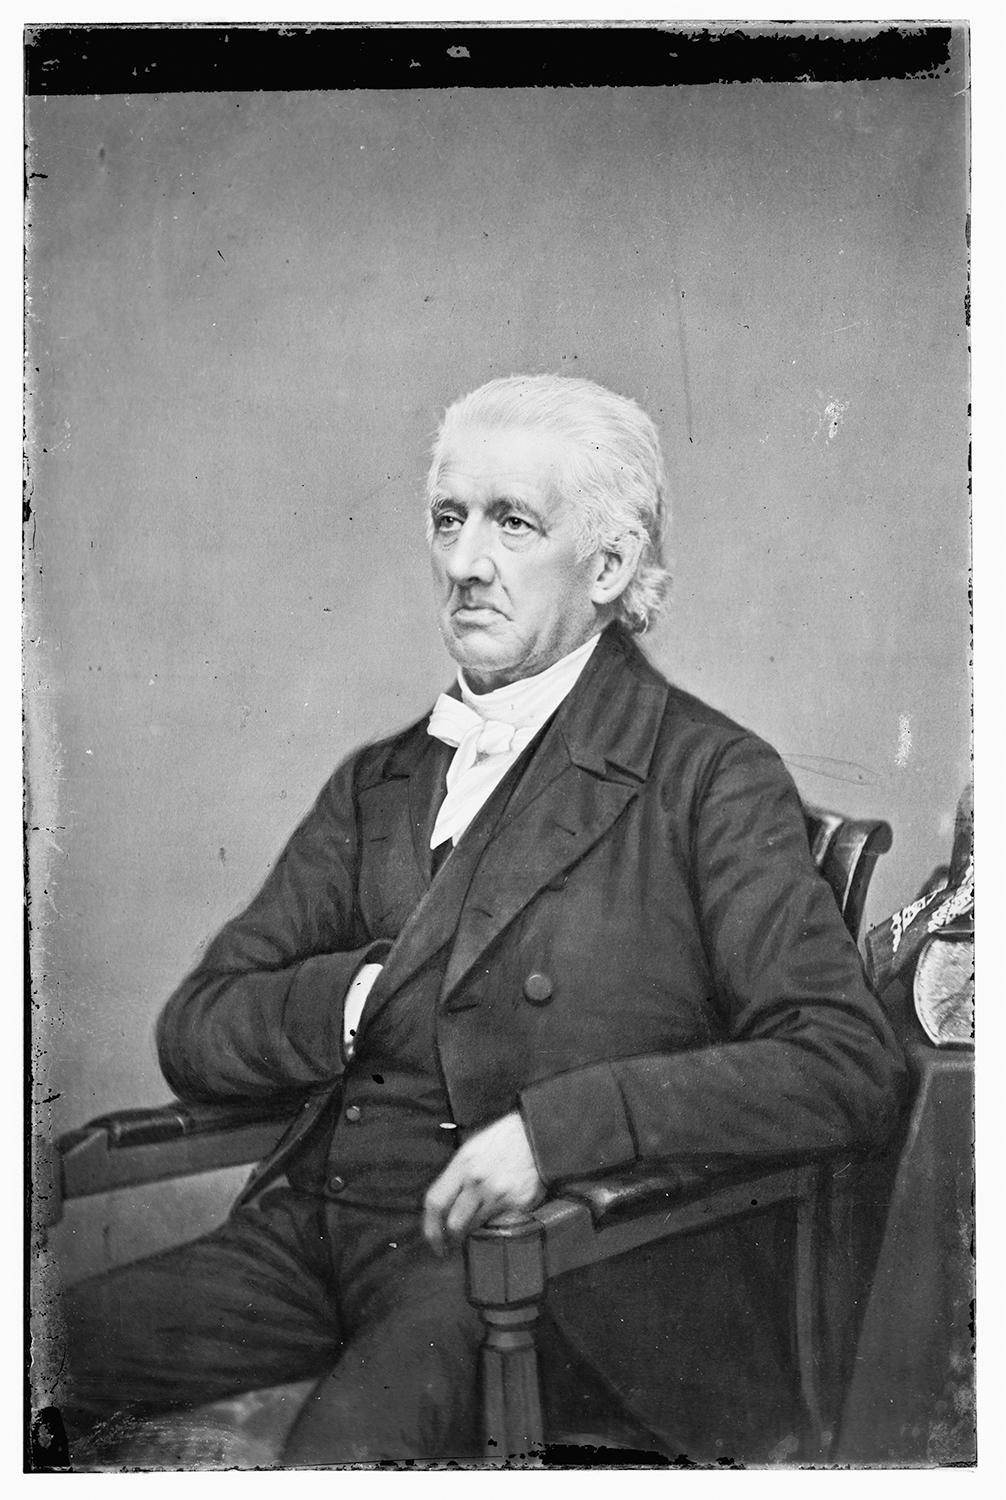 black and white photo of Lyman Beecher, wearing a black suit and white cravat, seated with his hand in his pocket